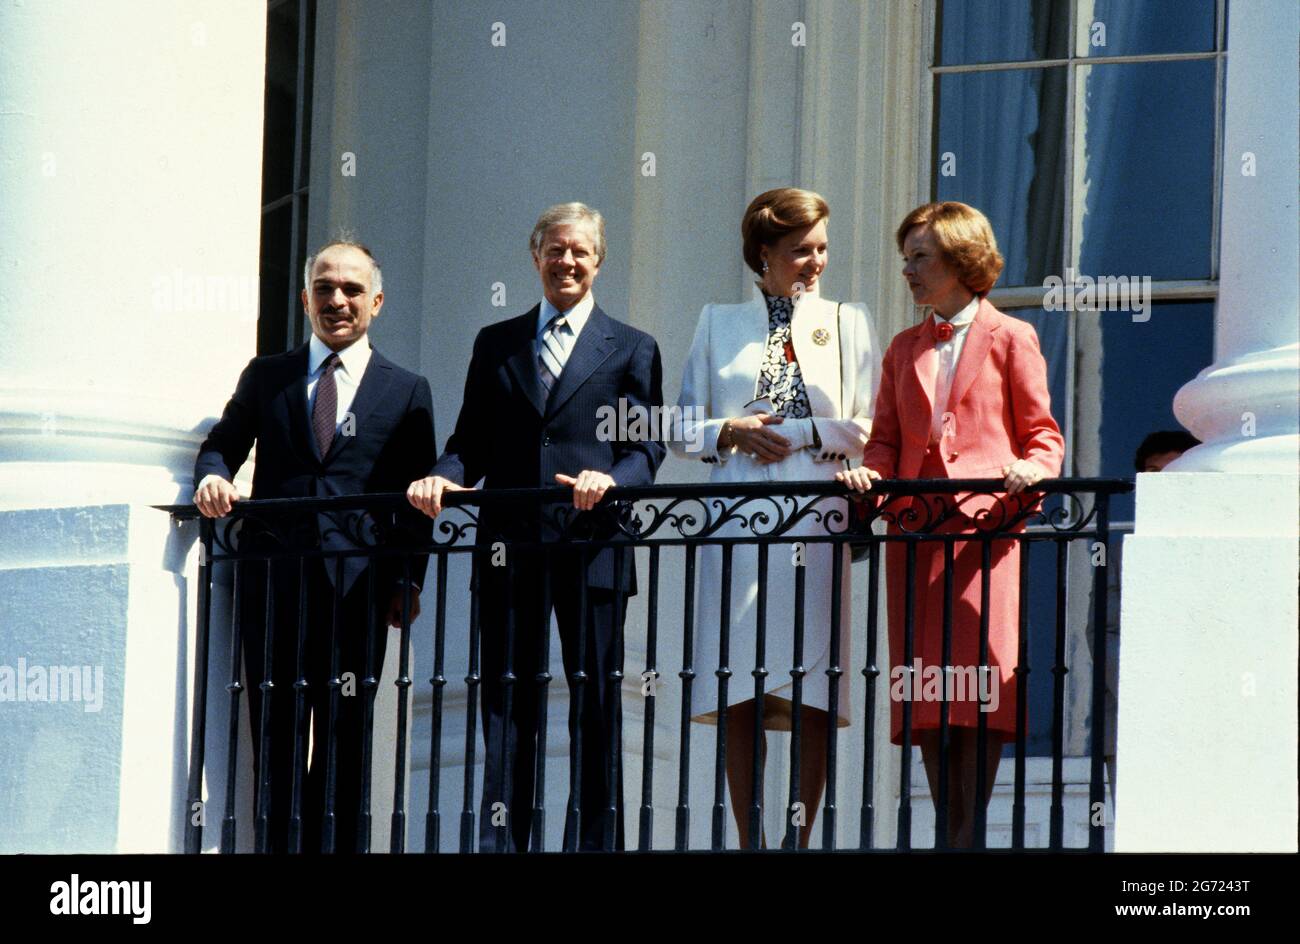 United States President Jimmy Carter, left center, and King Hussein I of Jordan, left, appear on the Blue Room Balcony at the conclusion of the State Arrival ceremony on the South Lawn of the White House in Washington, DC on 17 June, 1980. At center right is Queen Queen Noor al-Hussein of Jordan and at right is first lady Rosalynn CarterCredit: Benjamin E. "Gene" Forte/CNP Photo via Credit: Newscom/Alamy Live News Stock Photo